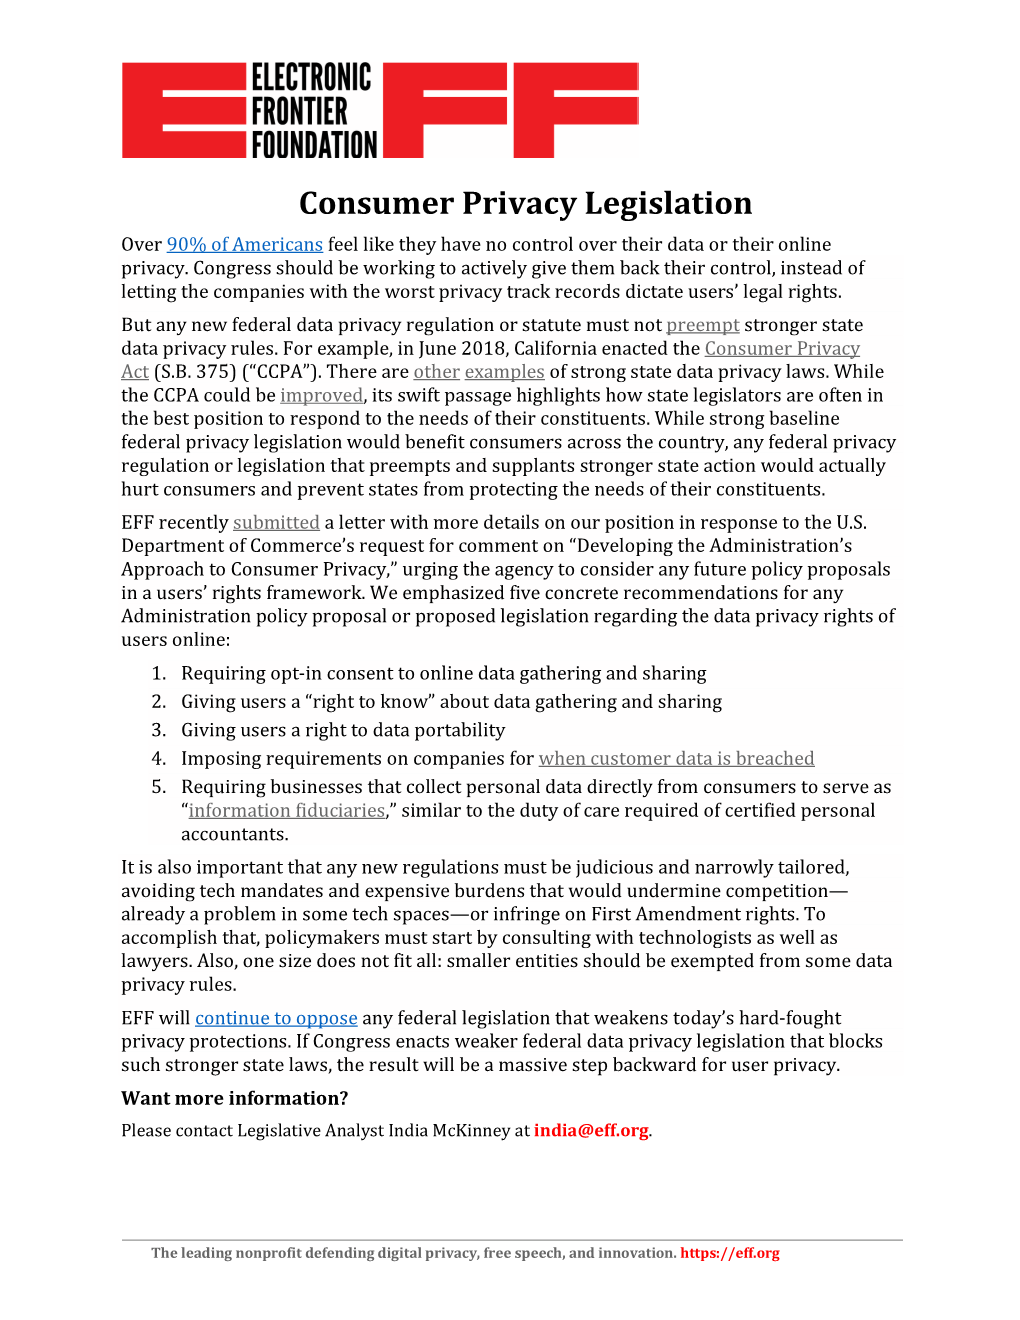 Consumer Privacy One Pager -2018.11